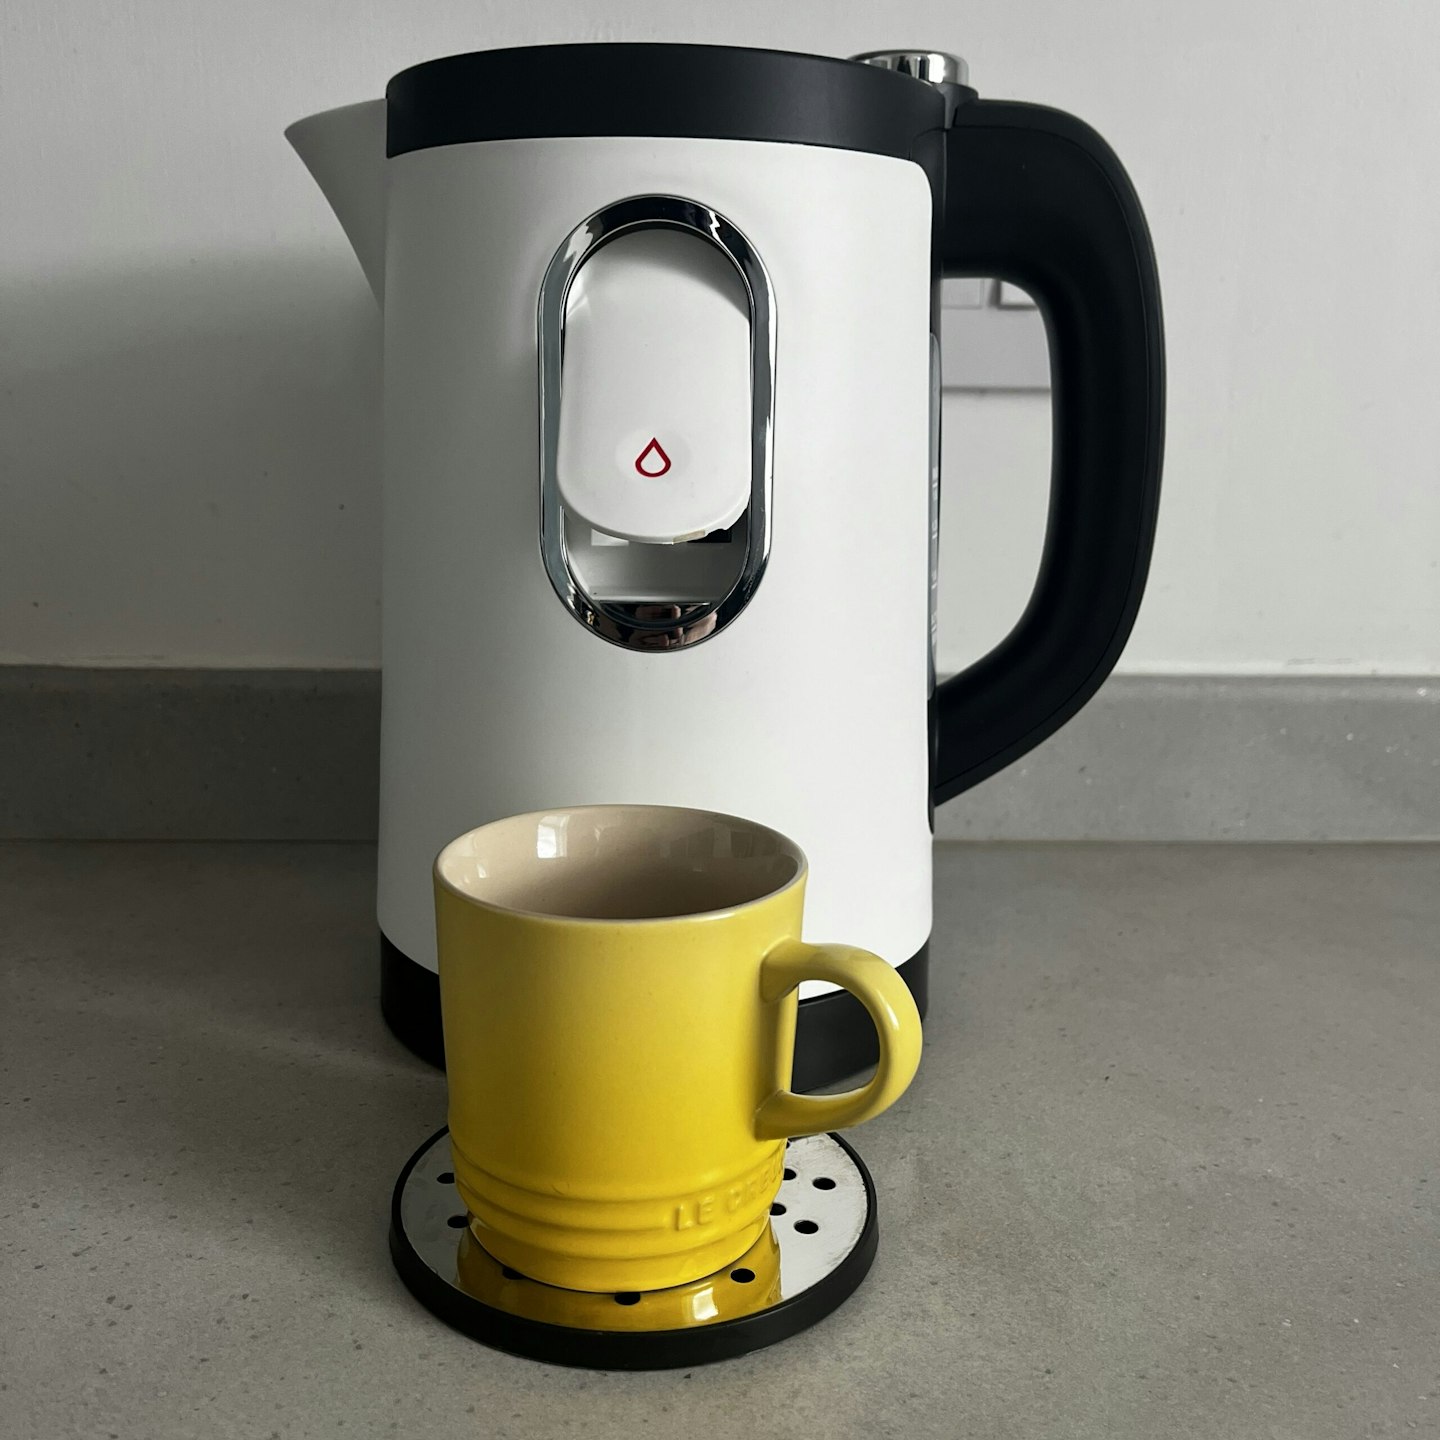 The LAICA Dual Flo Electric Kettle on test 